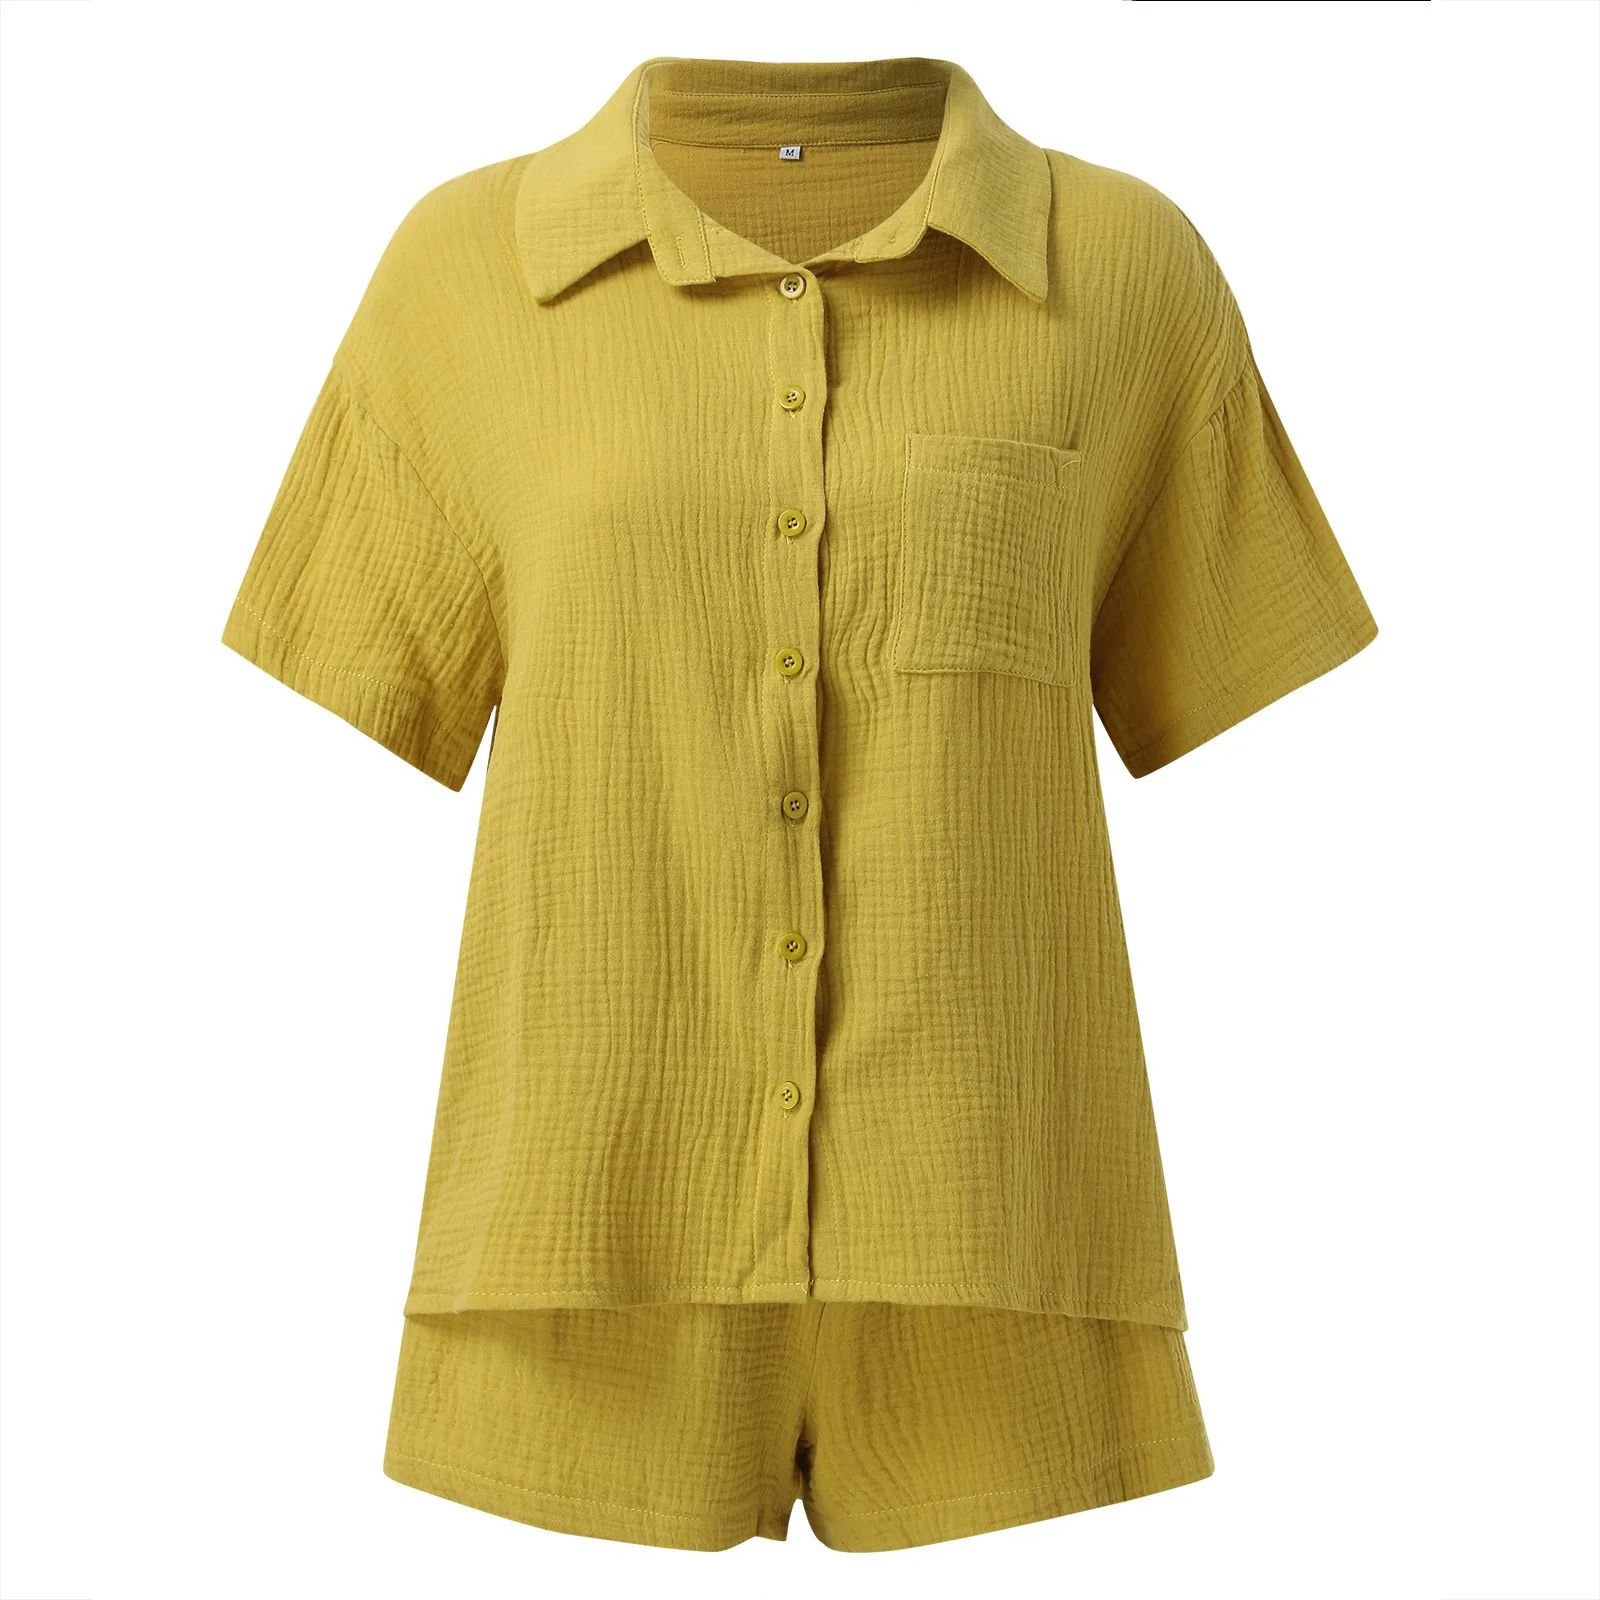 Summer Women's Suit Shirt And Short Sets Solid Color Casual Cotton And Linen Blouse And Shorts Two Piece Sets Women Outfit 2023 5